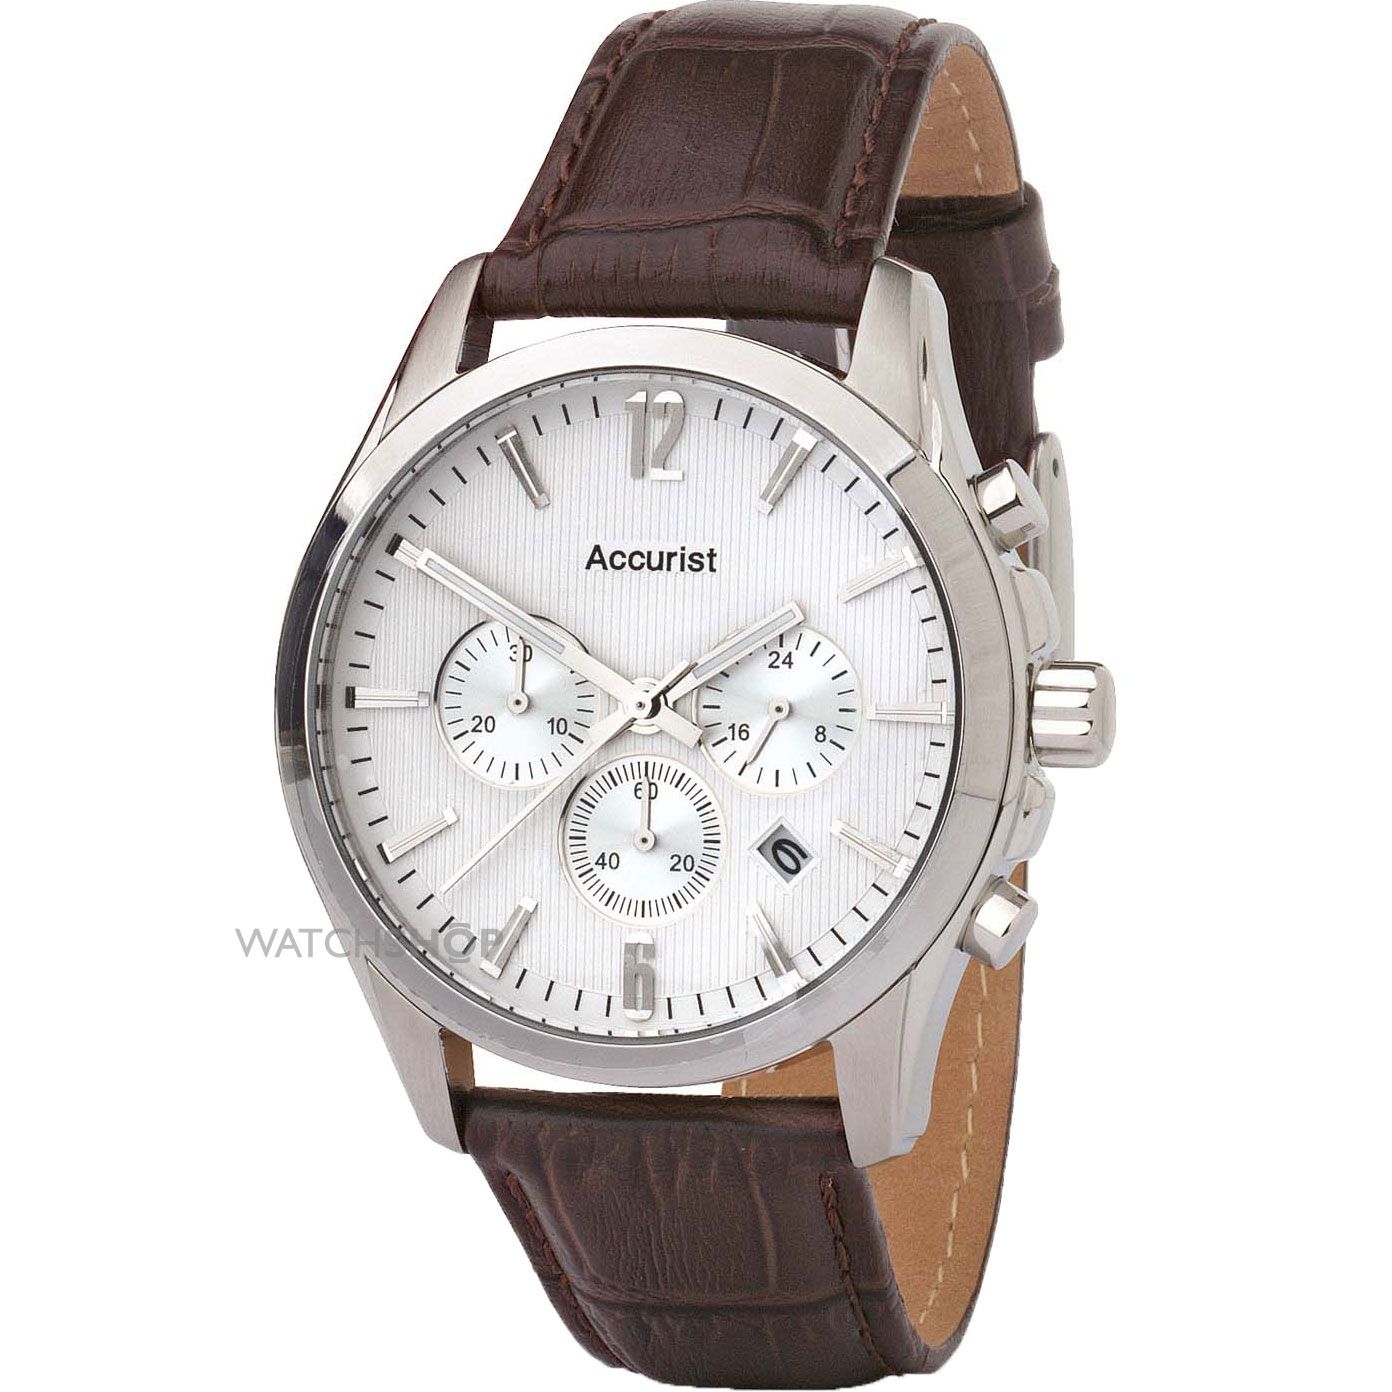 Accurist Men's Quartz Watch with Silver Dial Chronograph Display and Brown Leather Strap MS642S